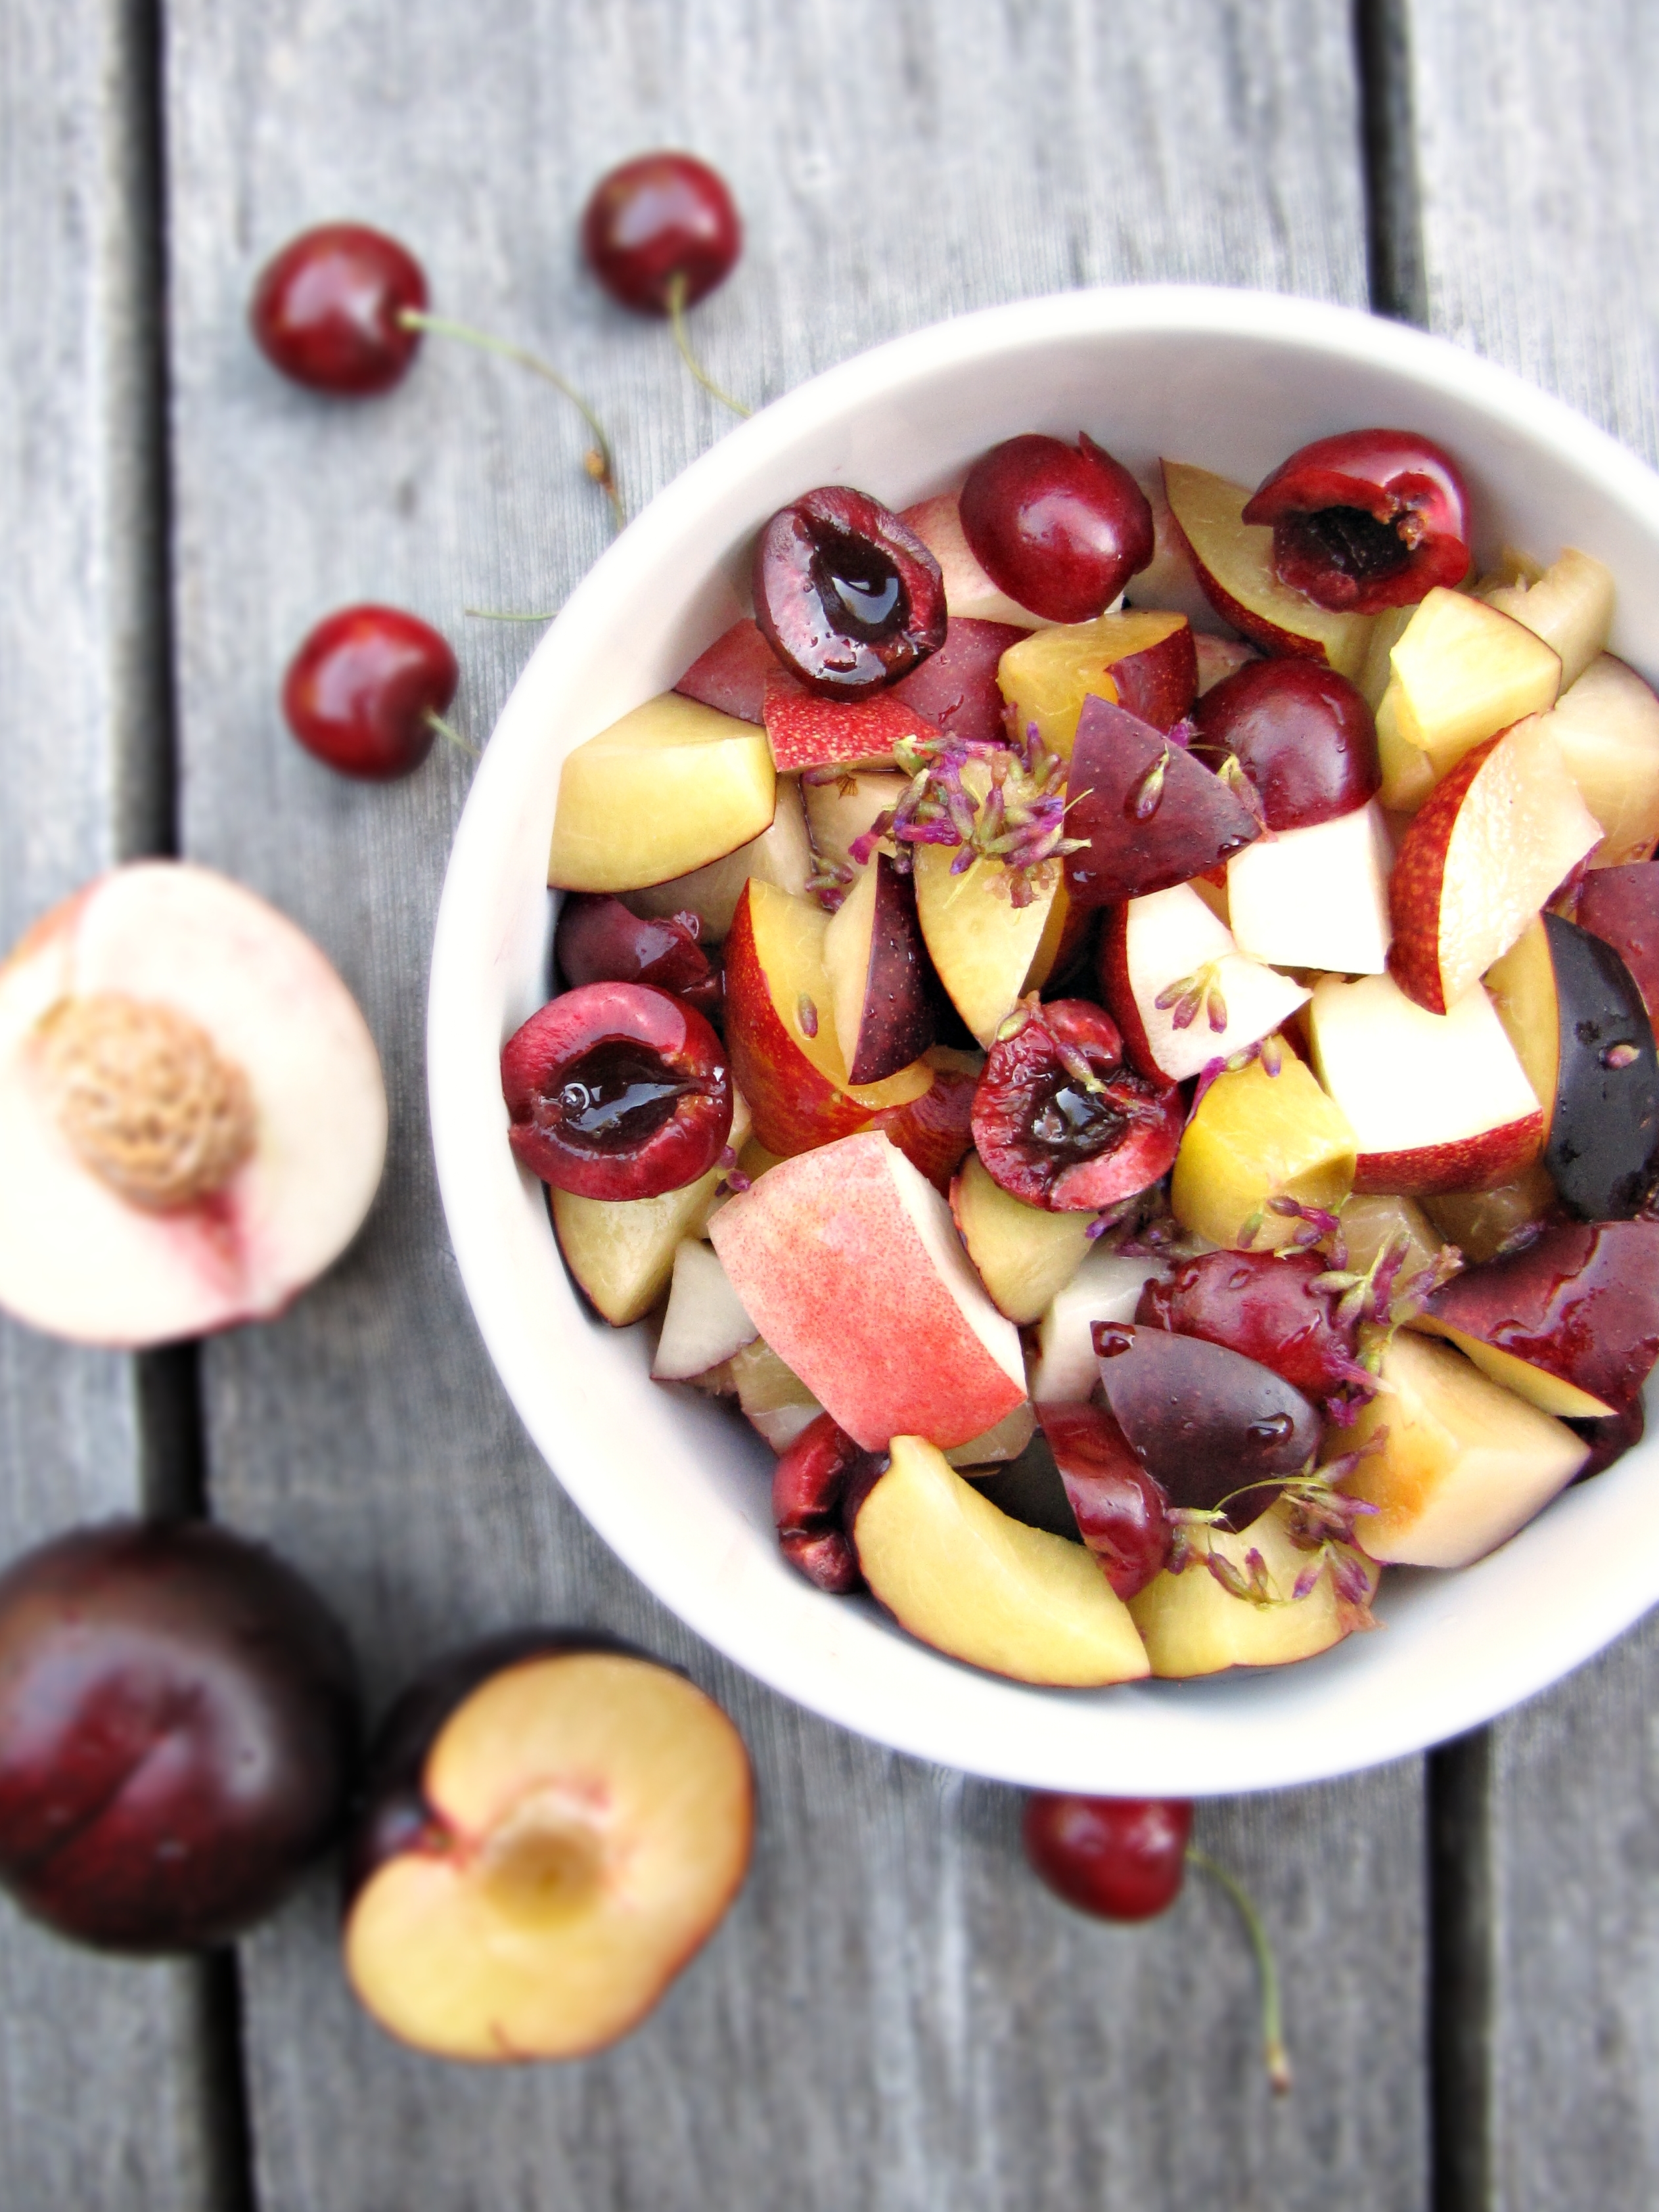 Greatist Collaboration: Stone Fruit Salad with Lemon-Lavender Syrup